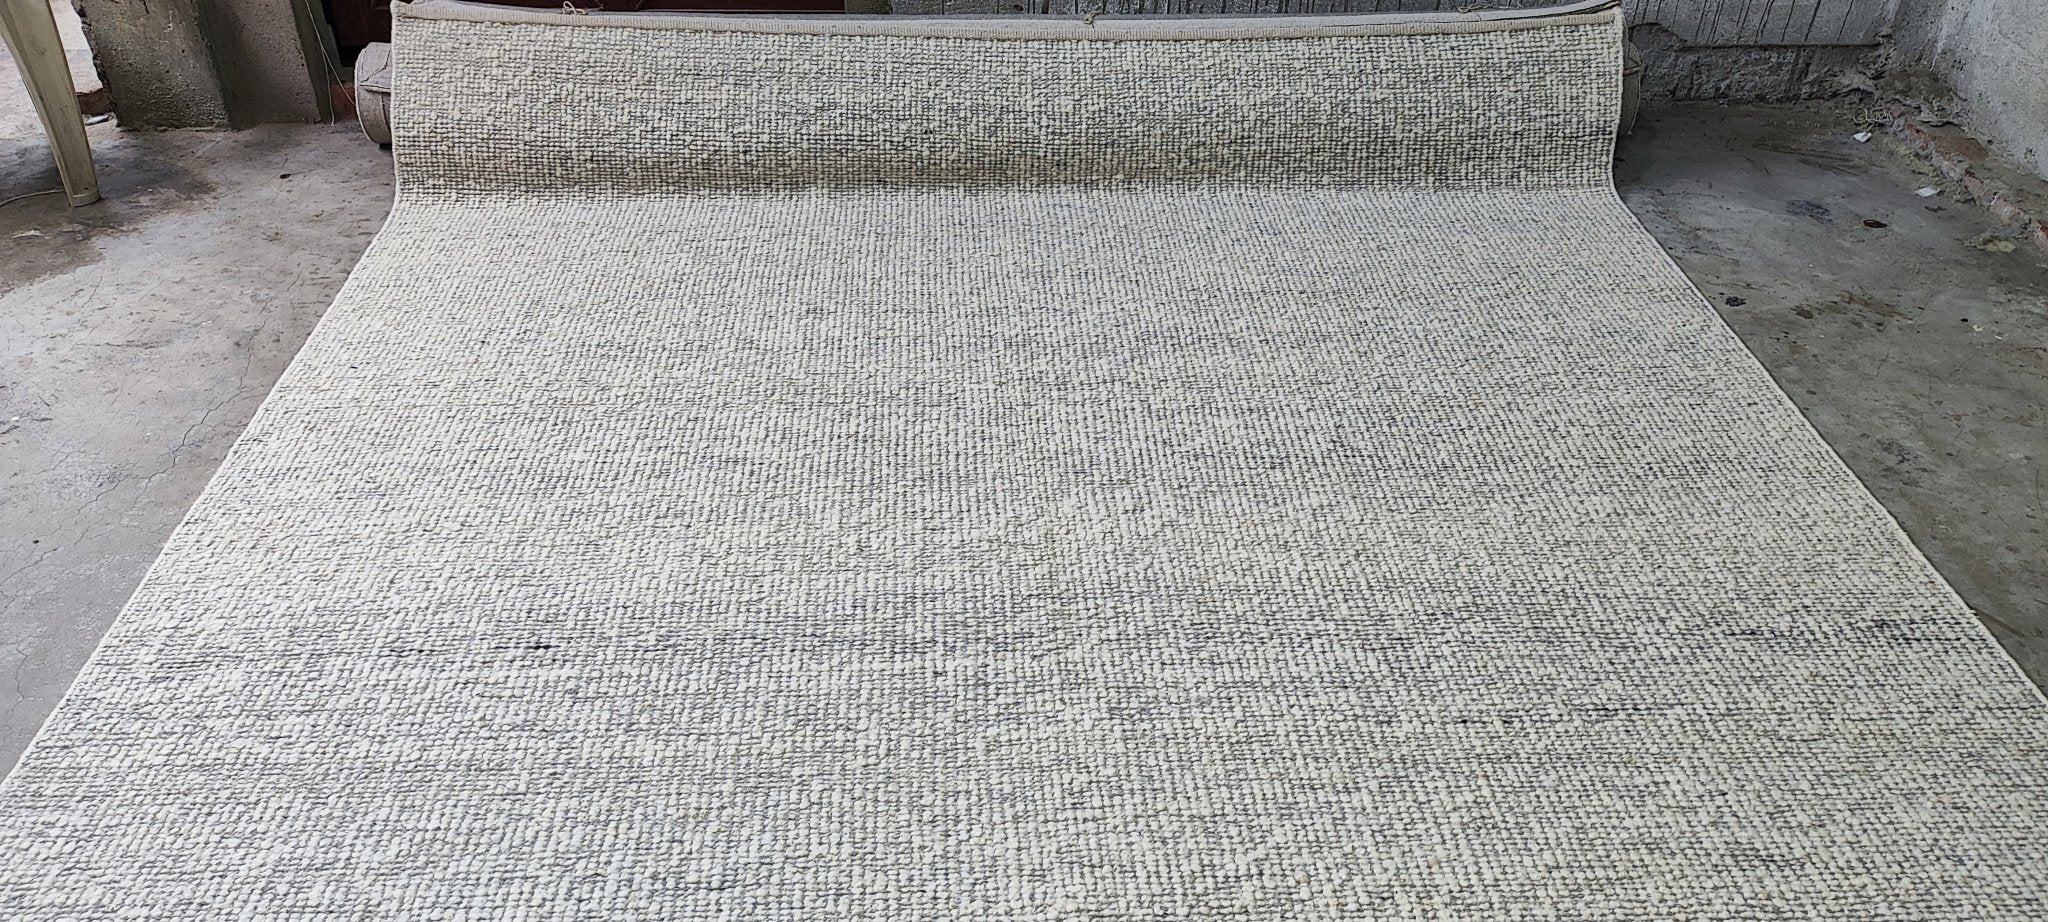 Sasha 8.3x11.9 Handwoven Natural Textured Durrie | Banana Manor Rug Factory Outlet